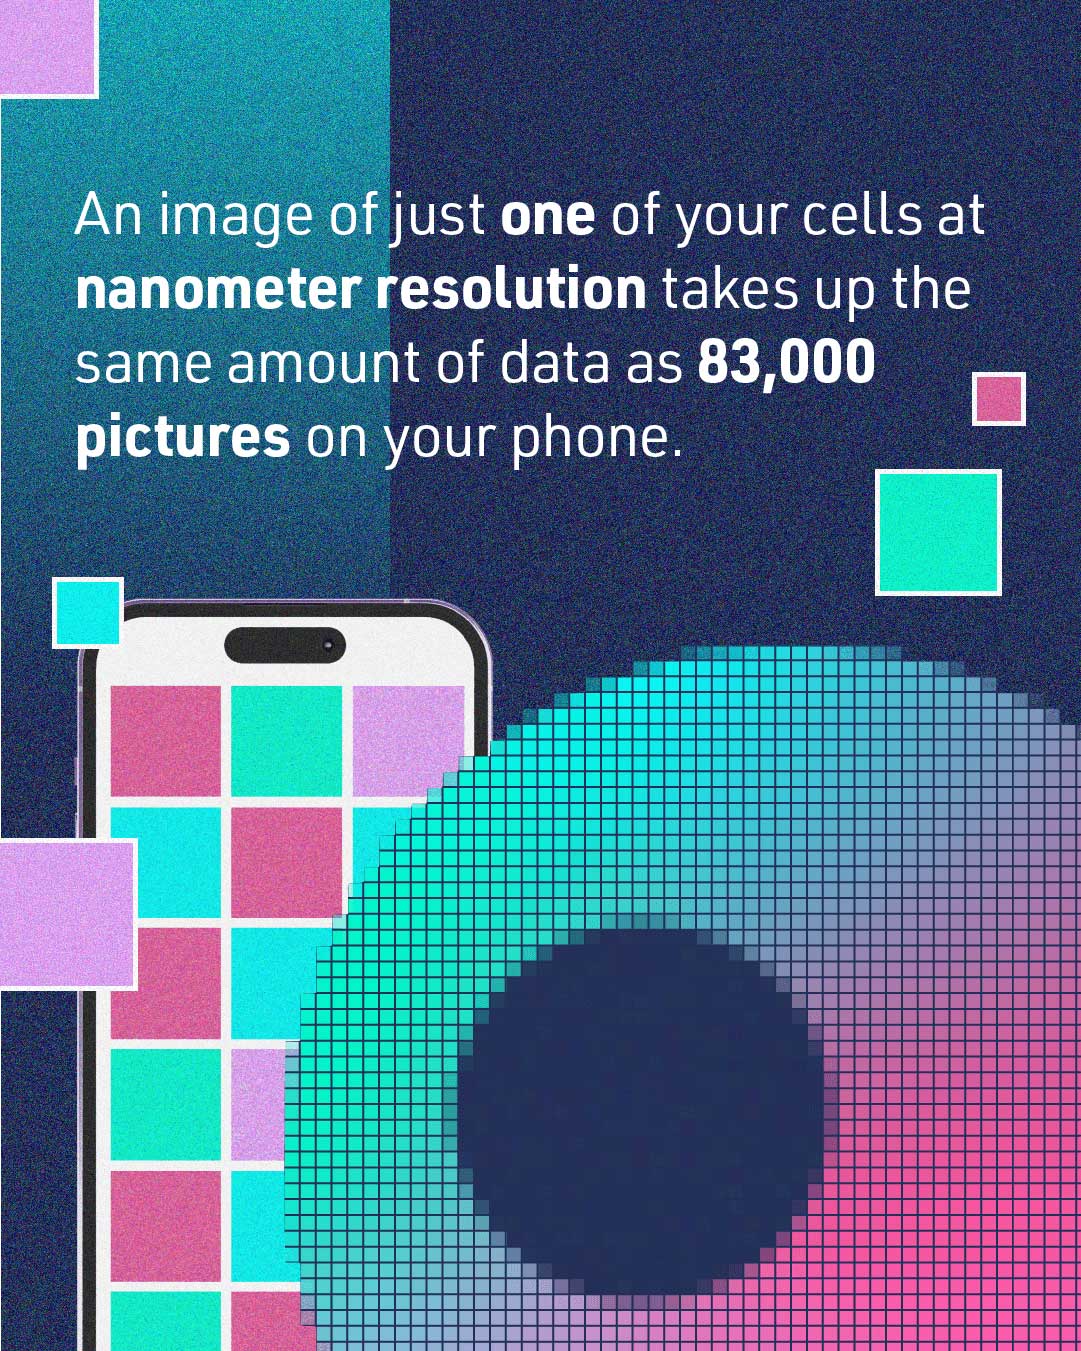 A pixelated cartoon of a round cell in the foreground with a smartphone in the background along with the text, “An image of just one of your cells at nanometer resolution takes up the same amount of data as 83,000 pictures on your phone."